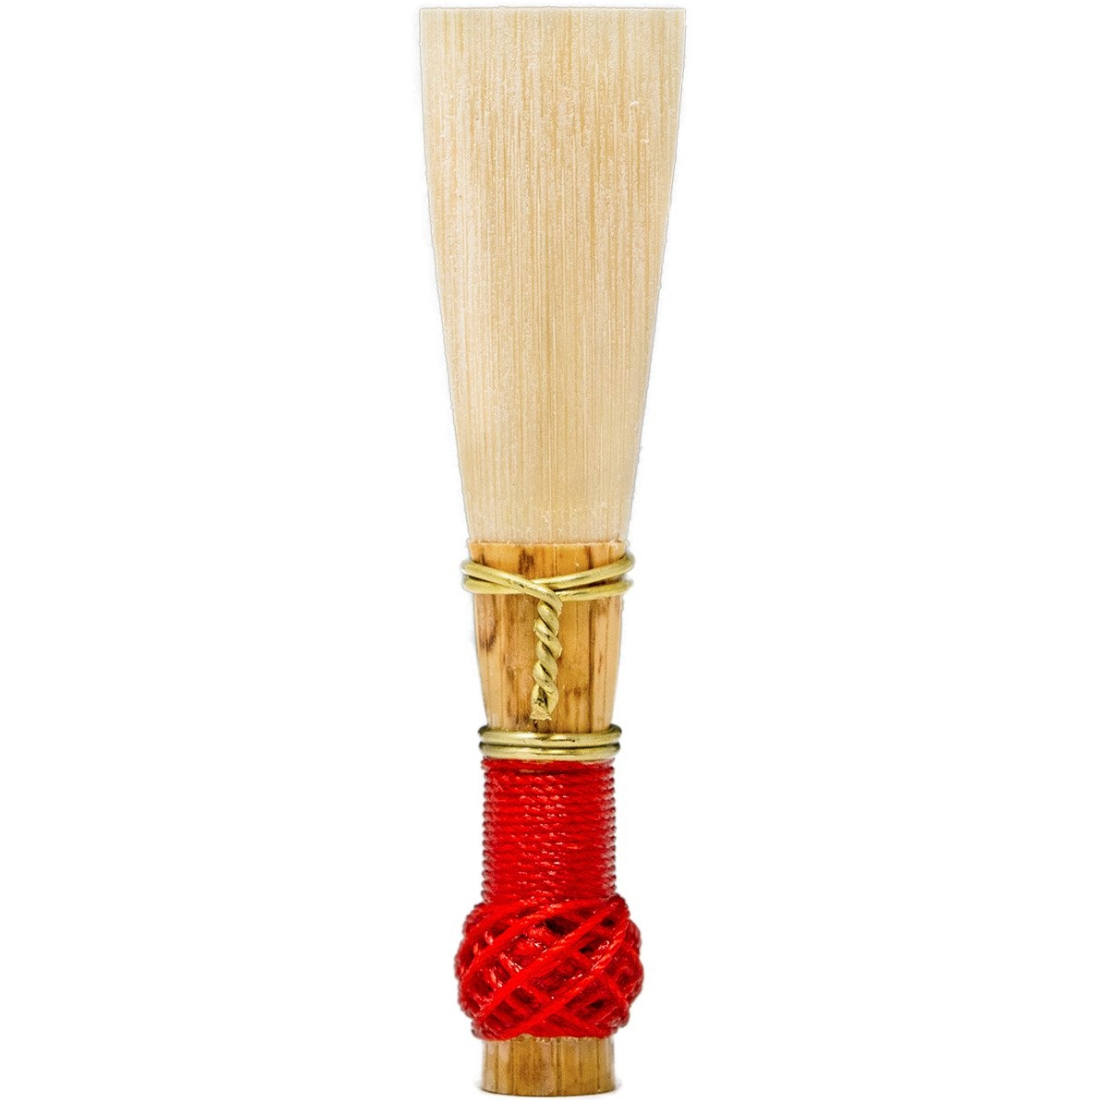 Jones Bassoon Reed with red threading